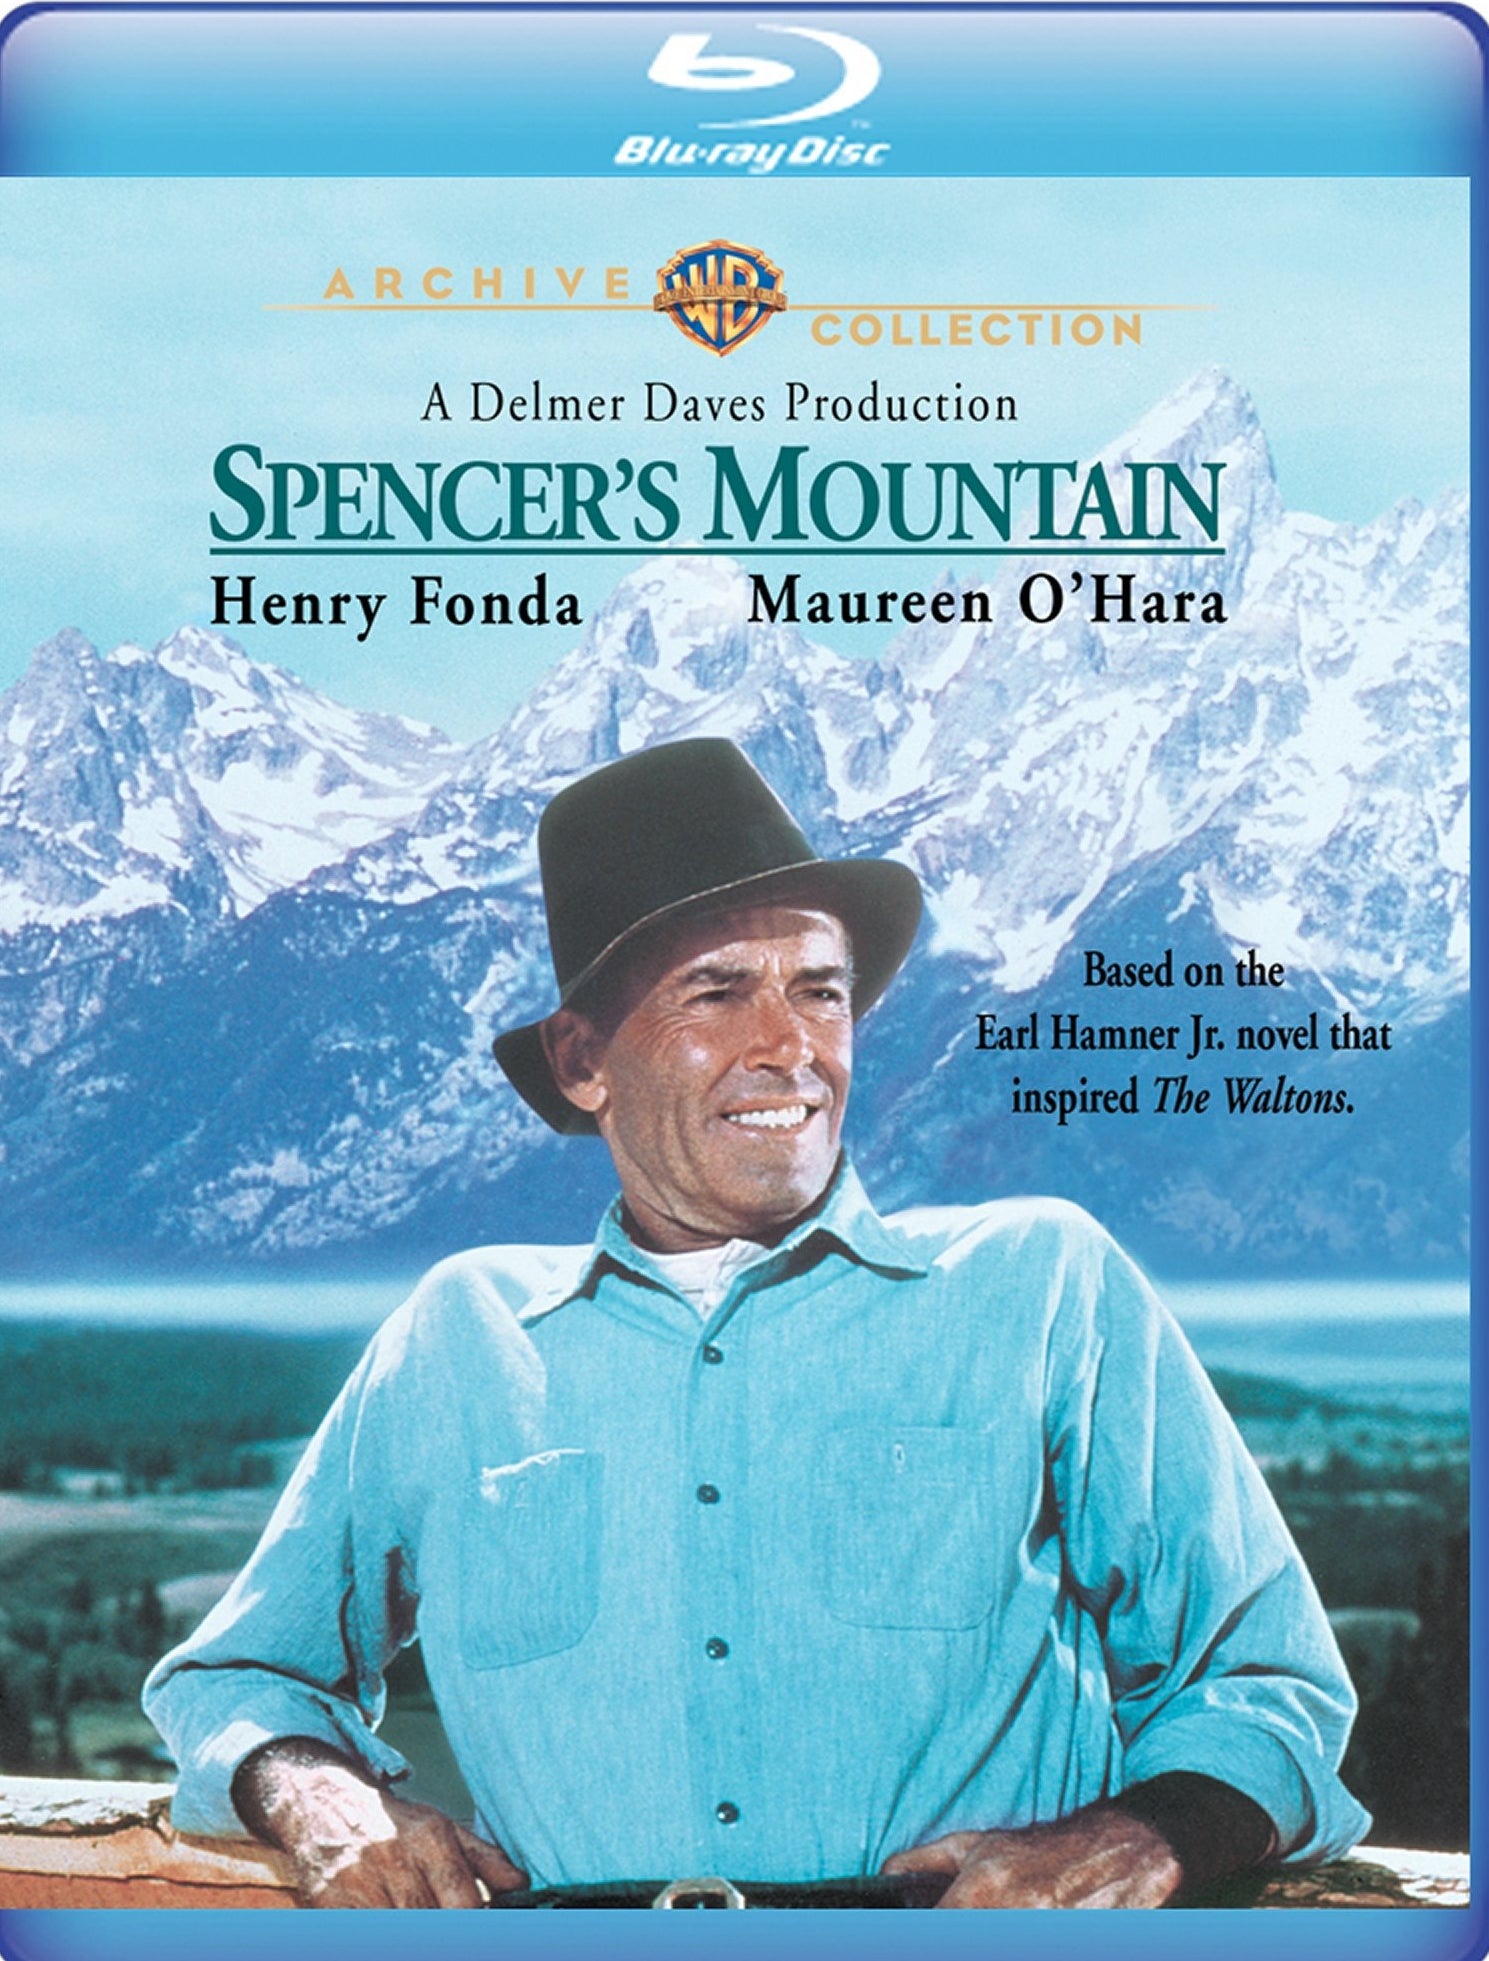 Spencer's Mountain [Blu-ray] cover art